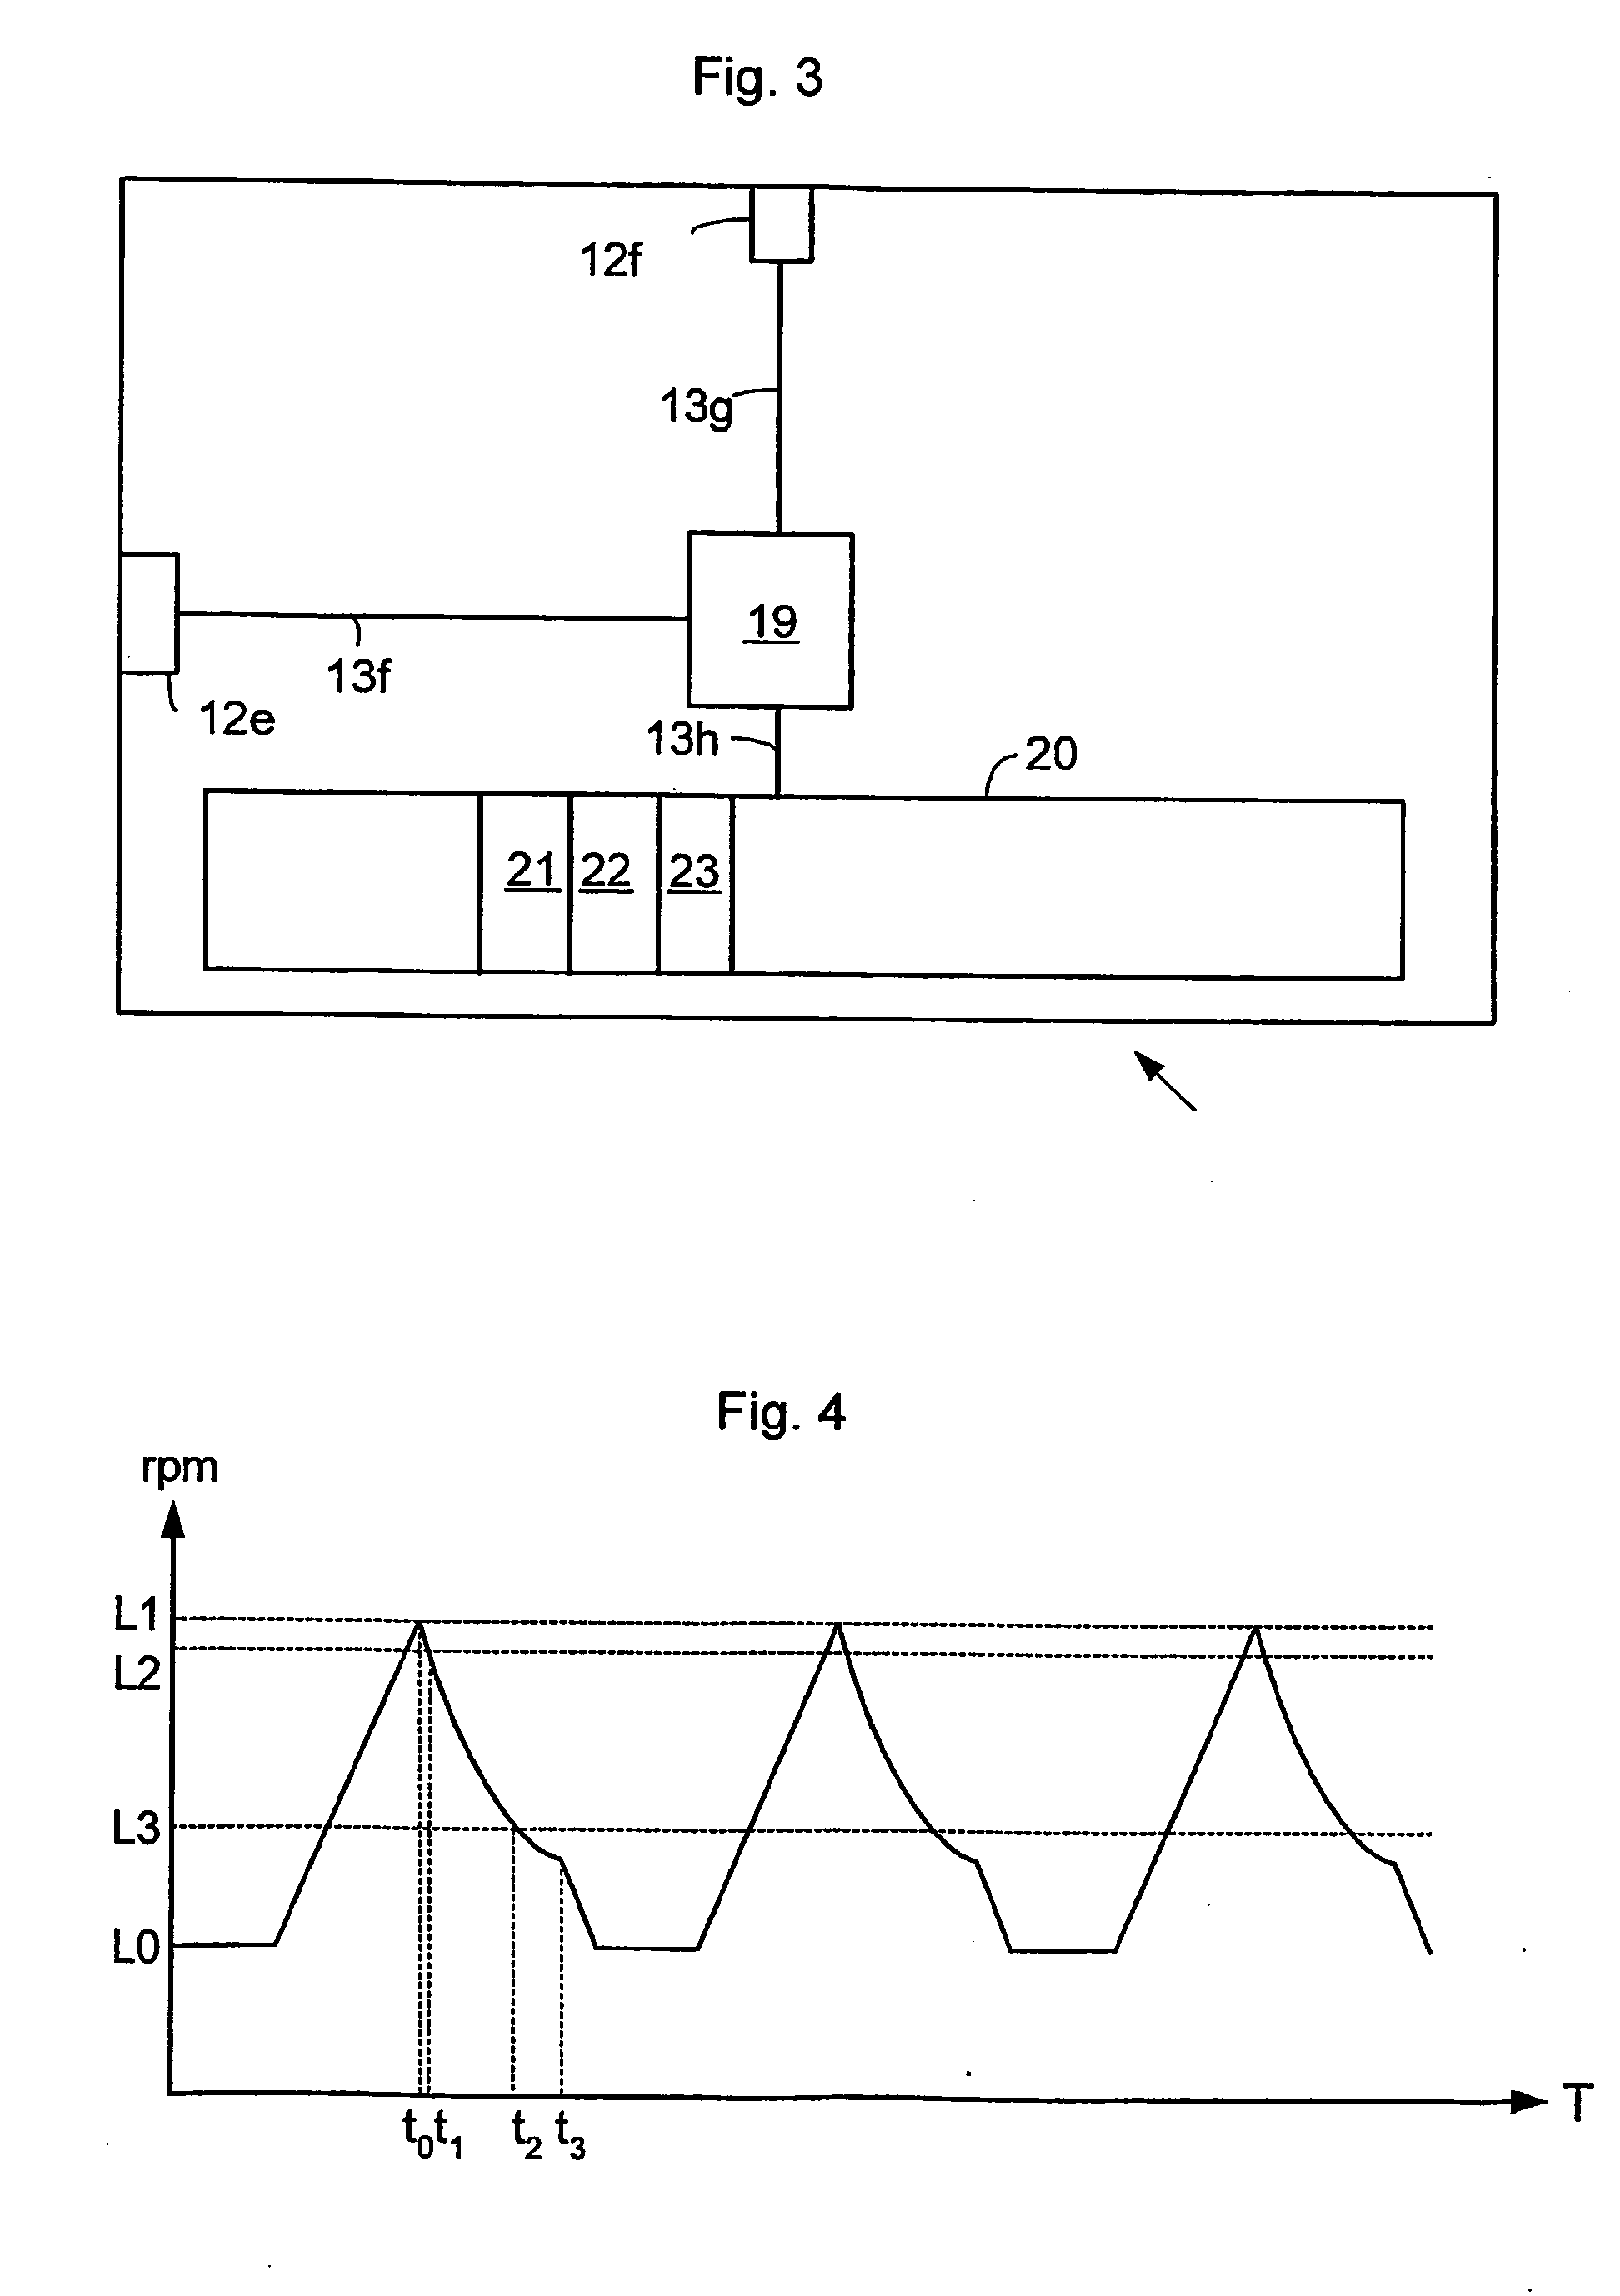 Method and computer program for identifying a fault in an engine